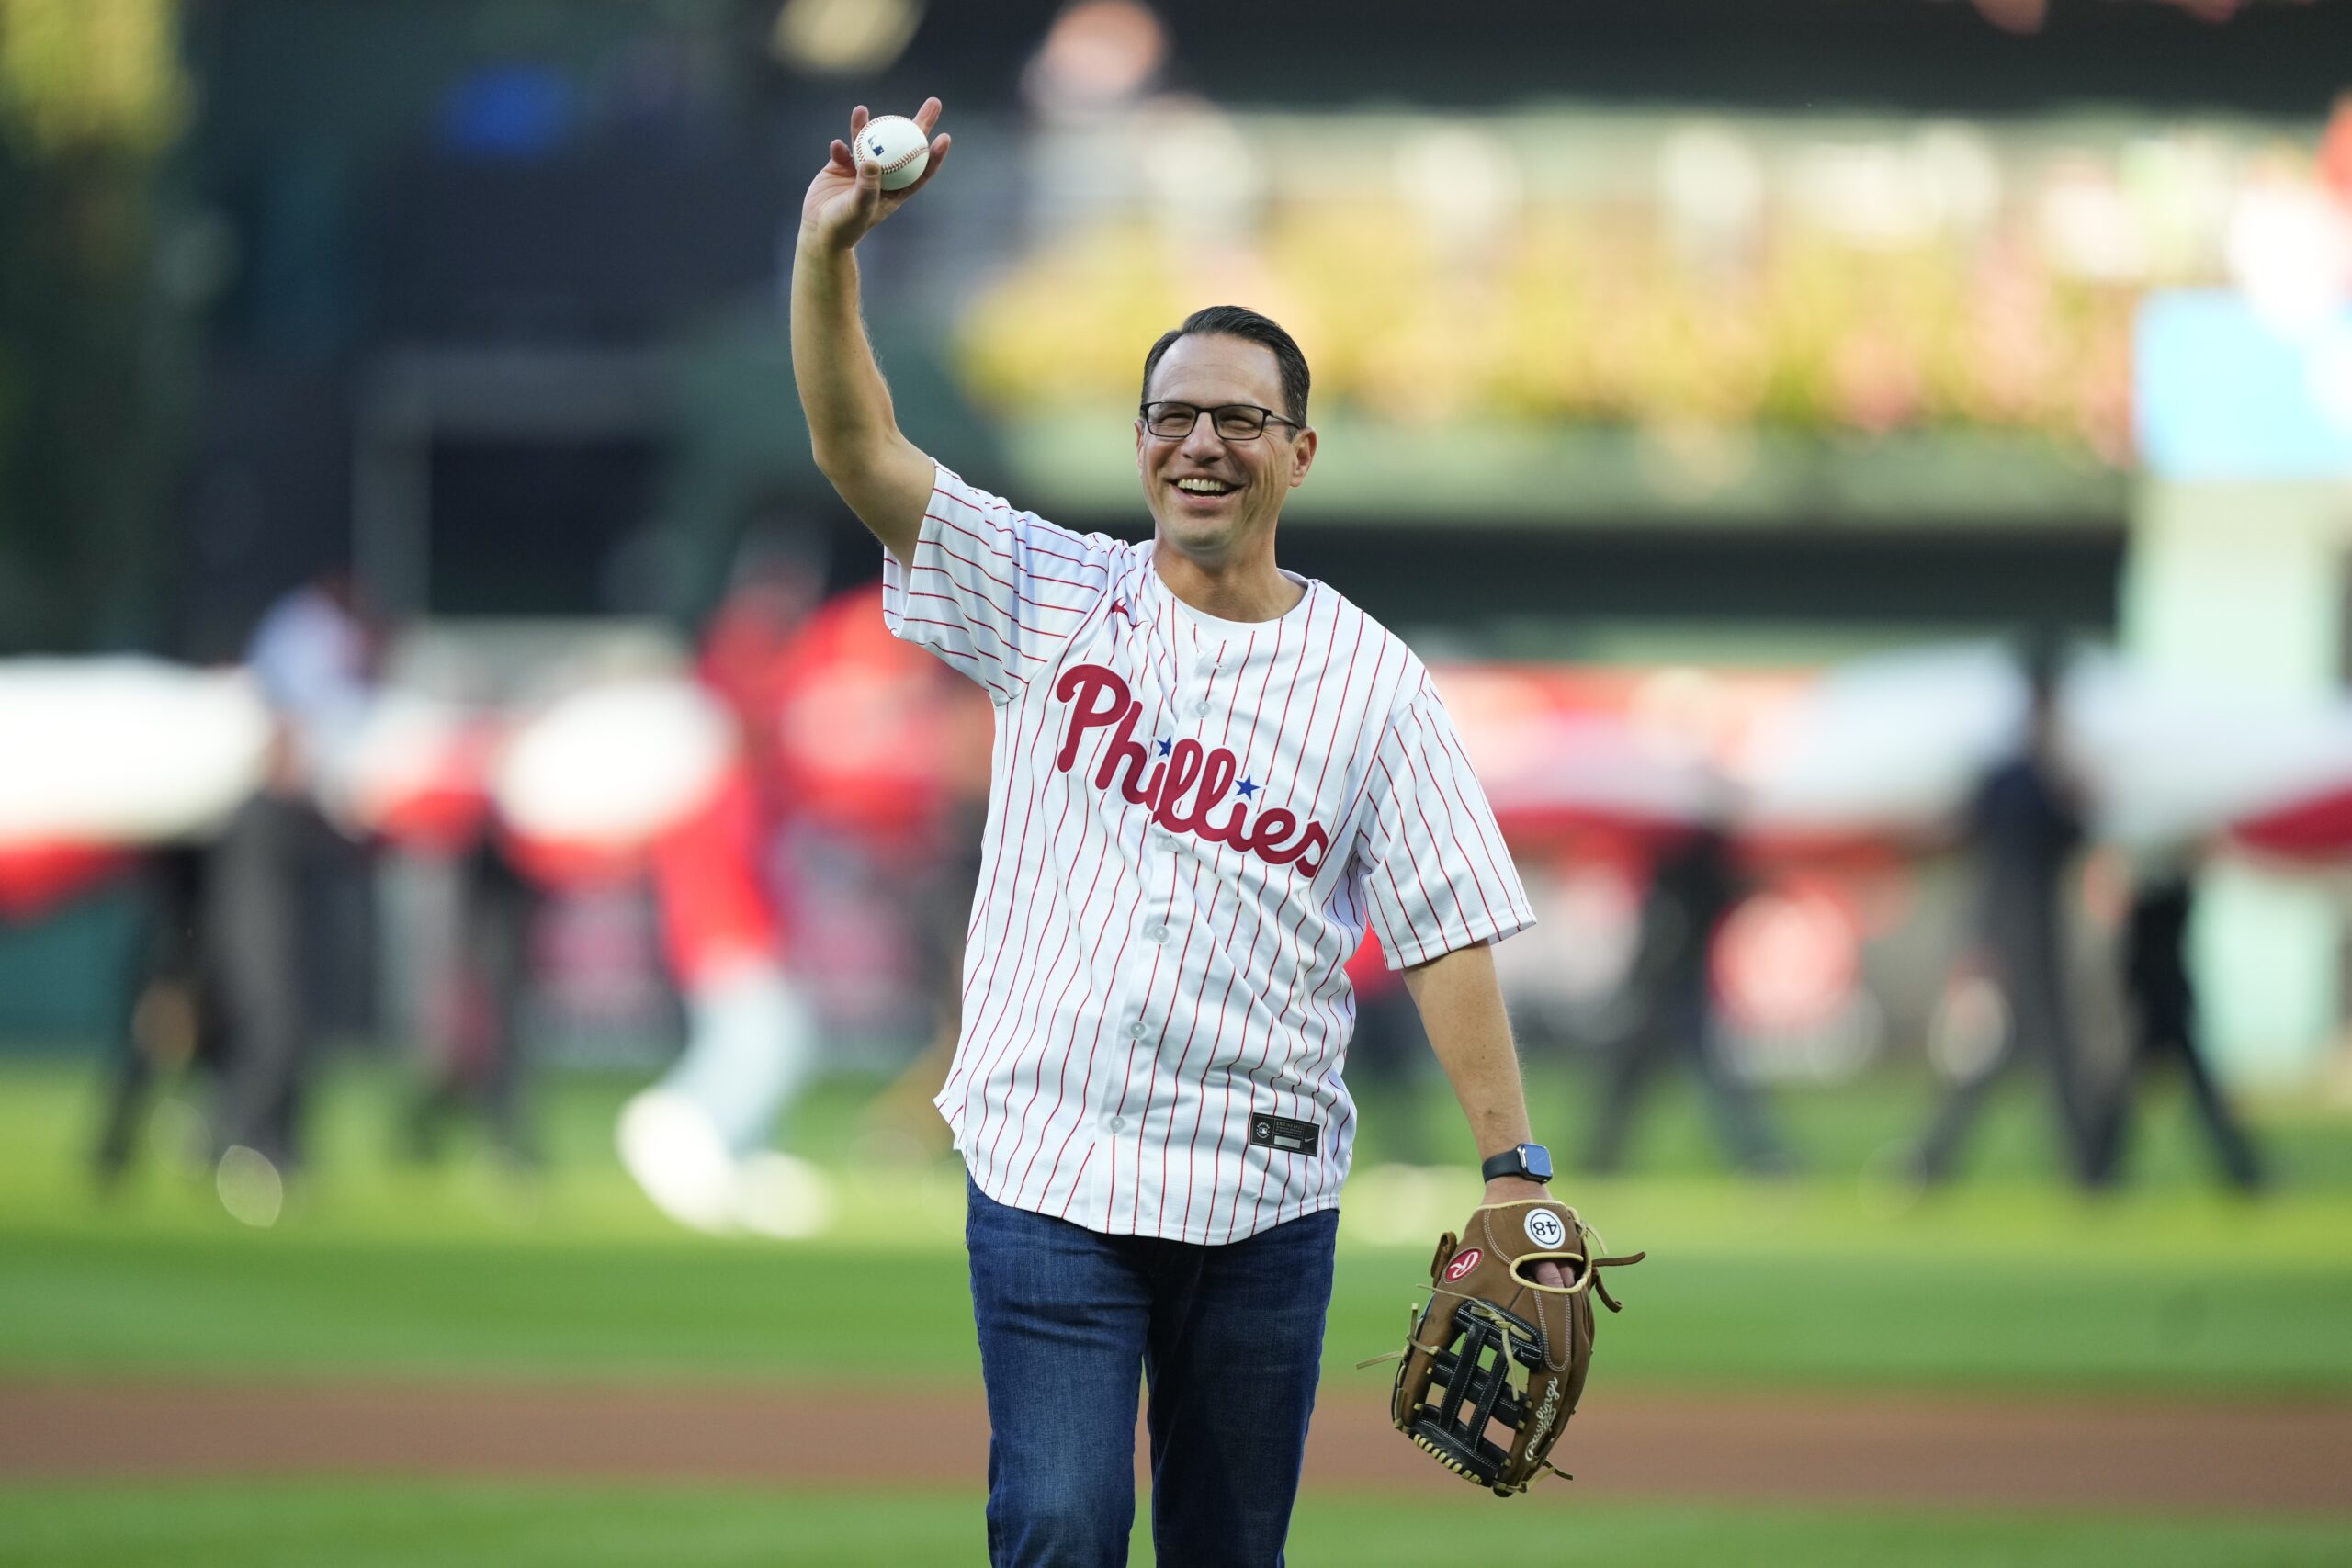 Governor Shapiro throws first pitch of Phillies NLDS home opener | ABC27